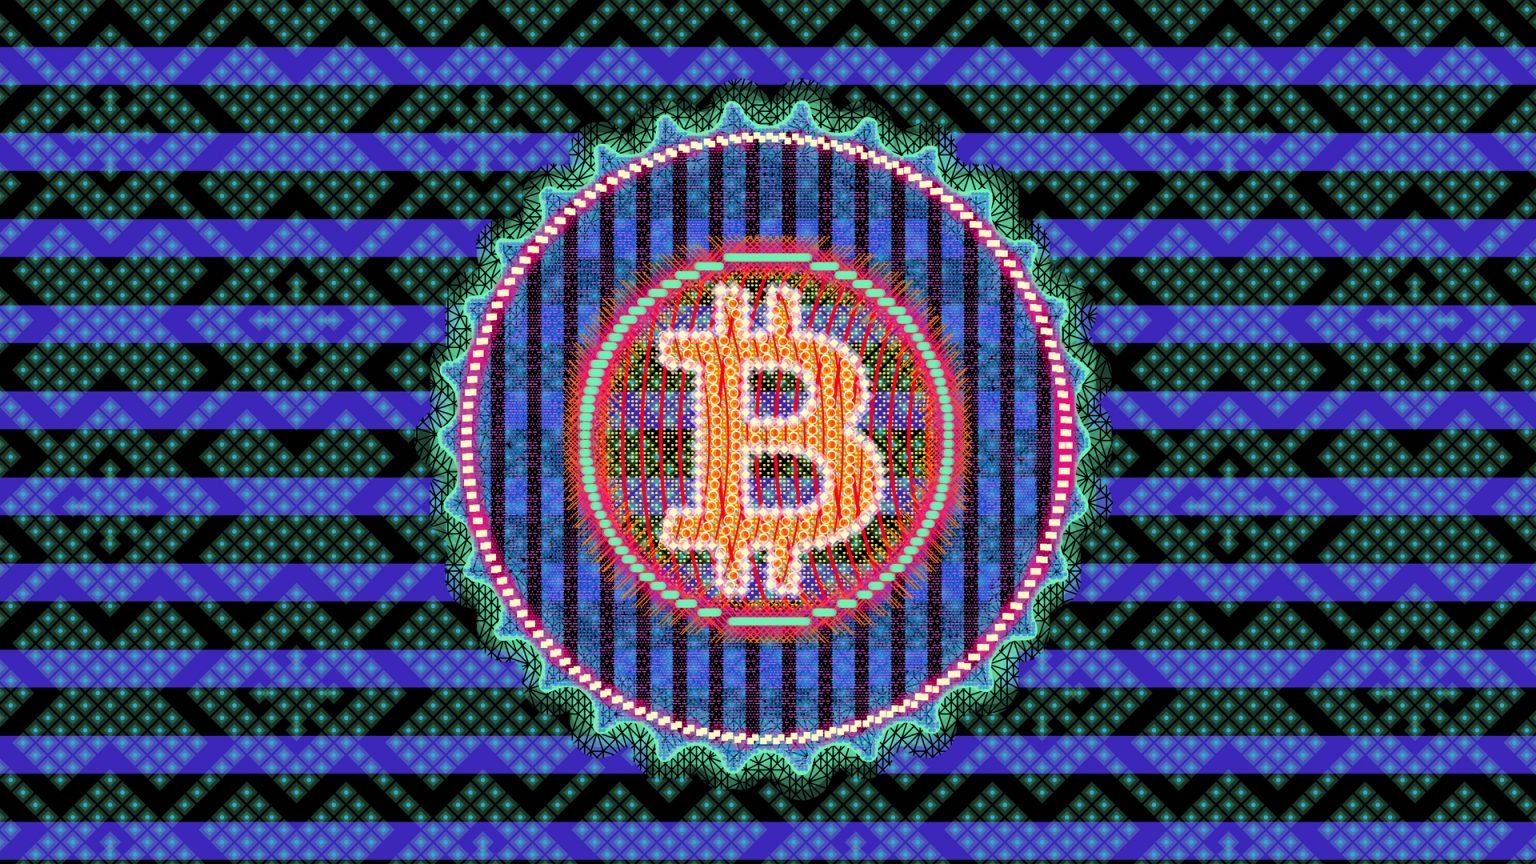 A Bitcoin logo in orange and red against a background of purple and black stripes with electric green dots